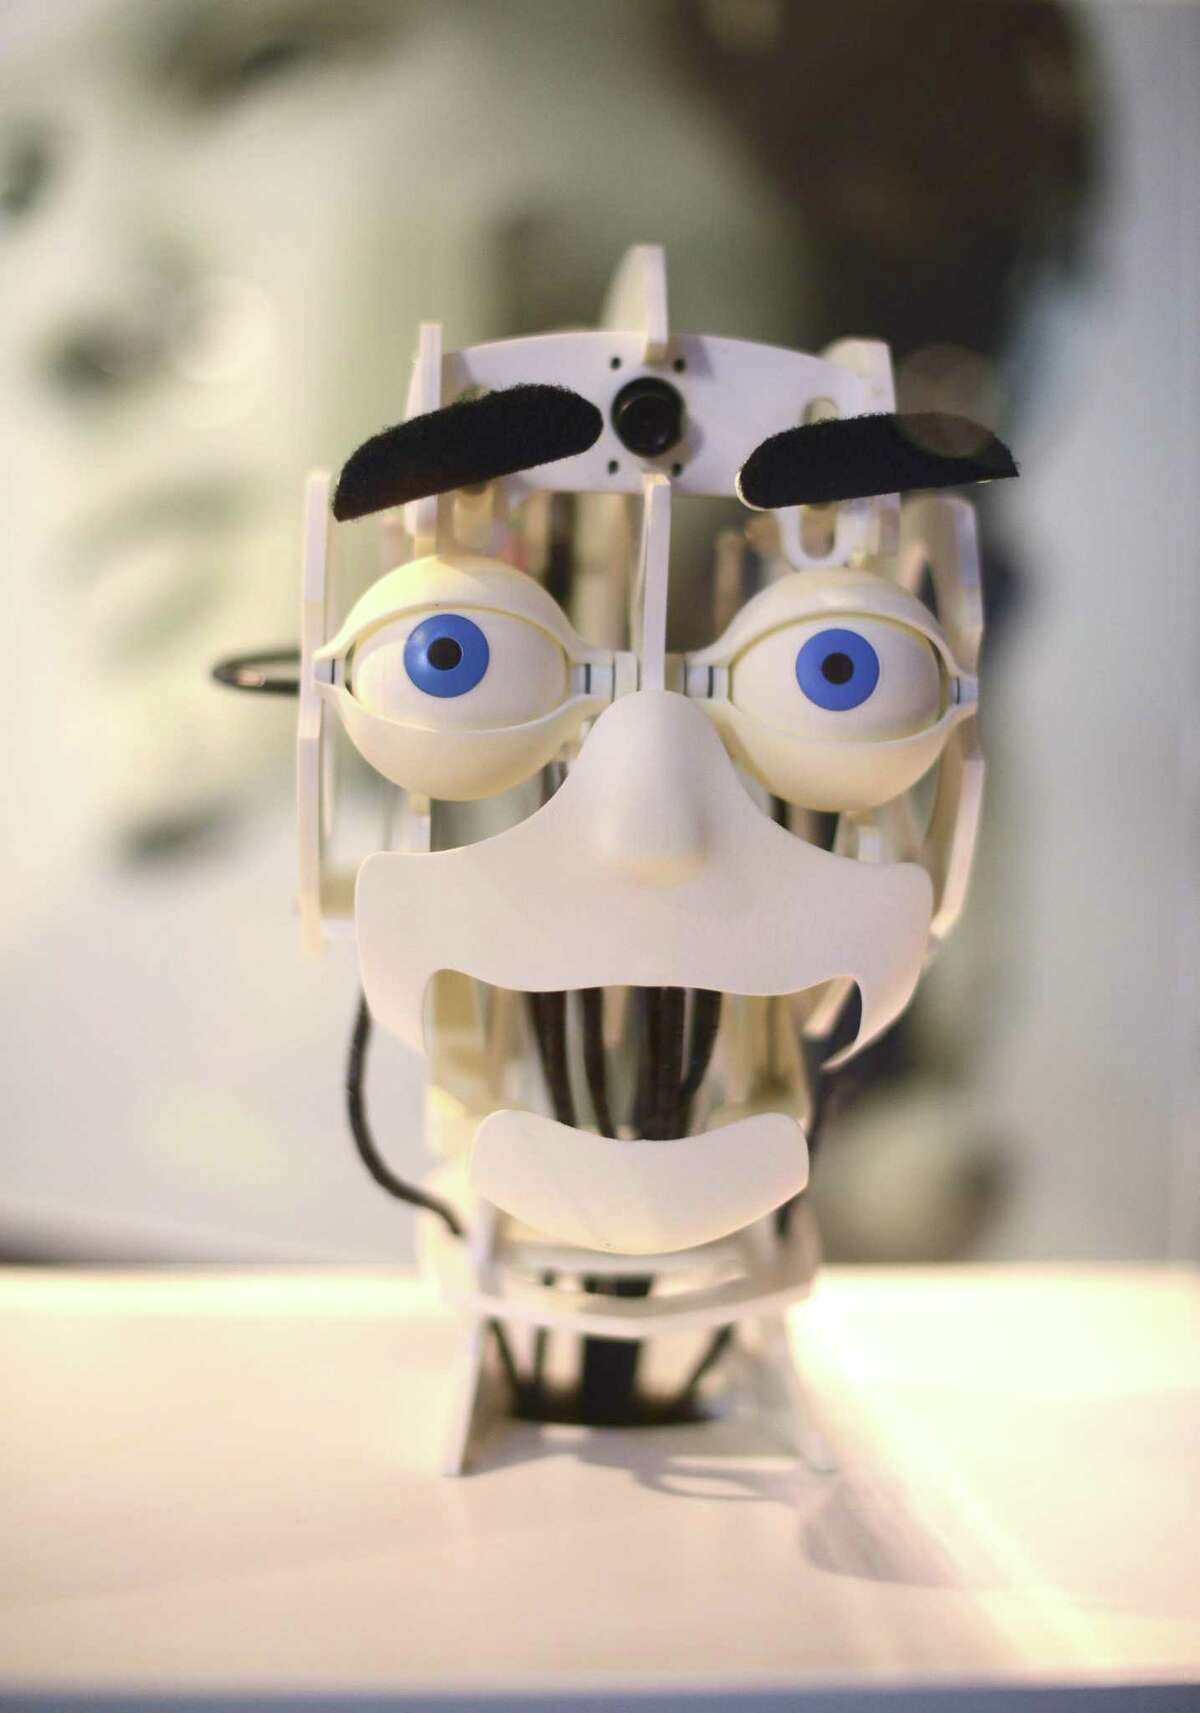 A robotic head smiles as it mimics a viewer at the at the "Hey, That Robot’s Copying Me" display at the Science Fiction, Science Future exhibit at the DoSeum on Saturday, Oct. 7, 2017. The exhibit includes displays that show 3D holograms, teleportation, cyborg design, and artificial intelligence. The exhibit will be on display until Jan. 6, 2018.